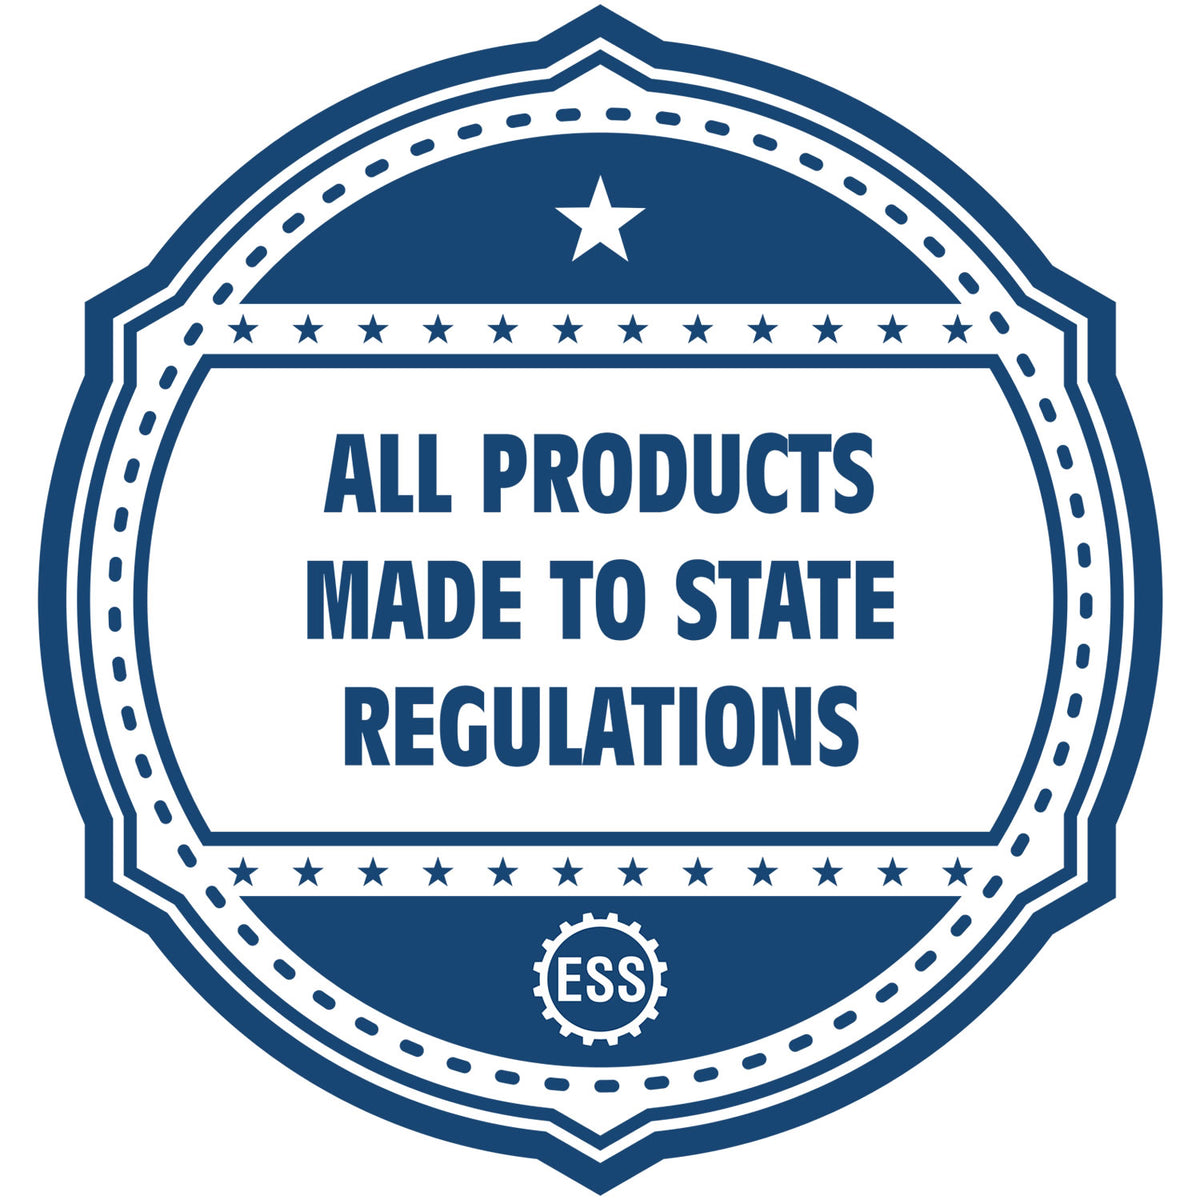 An icon or badge element for the North Carolina Landscape Architectural Seal Stamp showing that this product is made in compliance with state regulations.